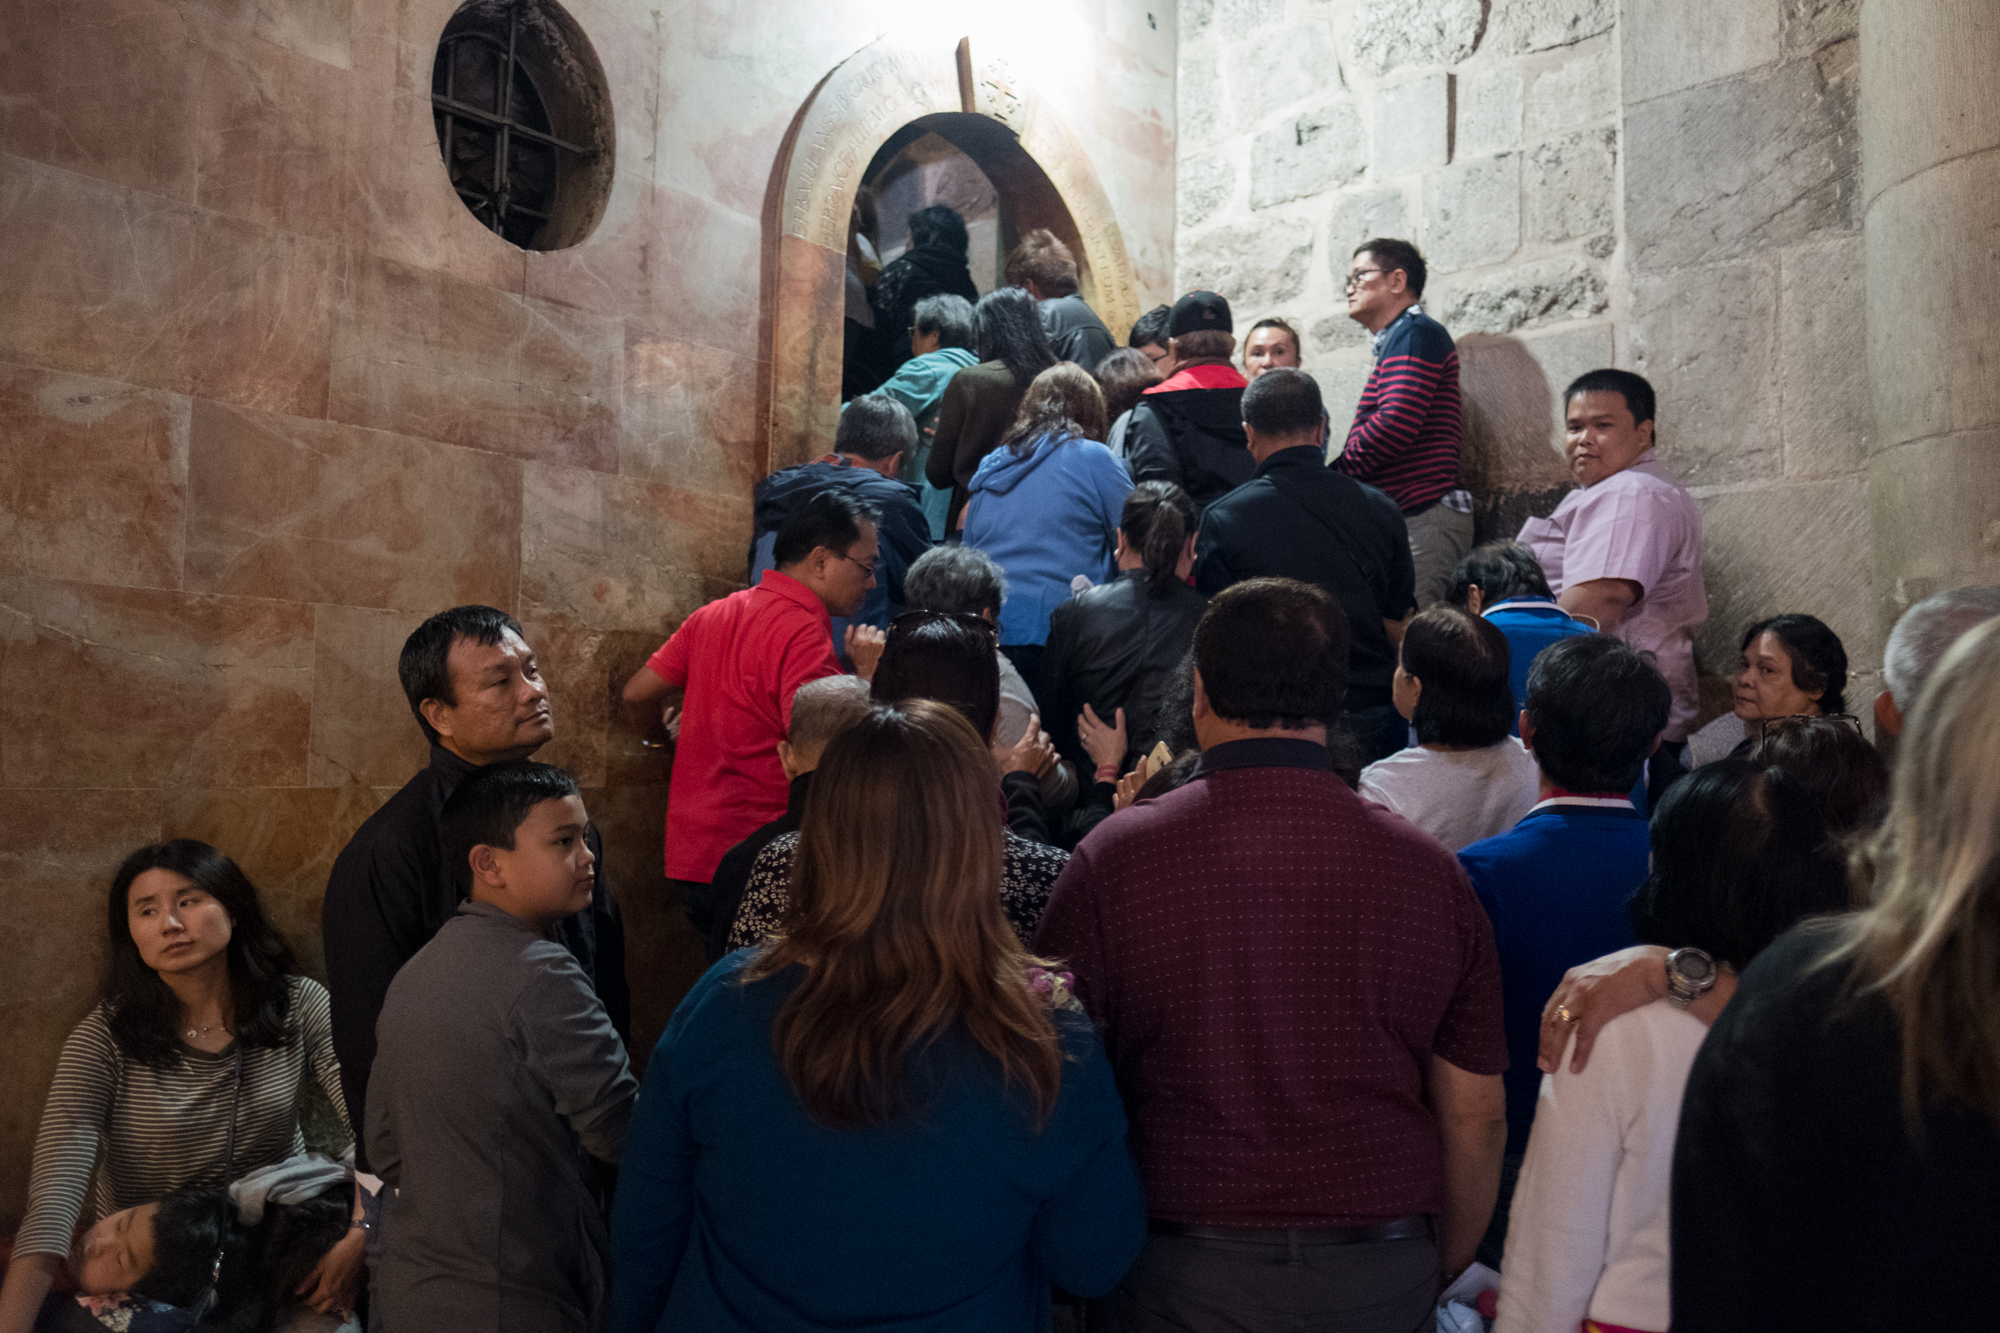 A crowd of pilgrims presses into the stairwell that leads to Calvary.